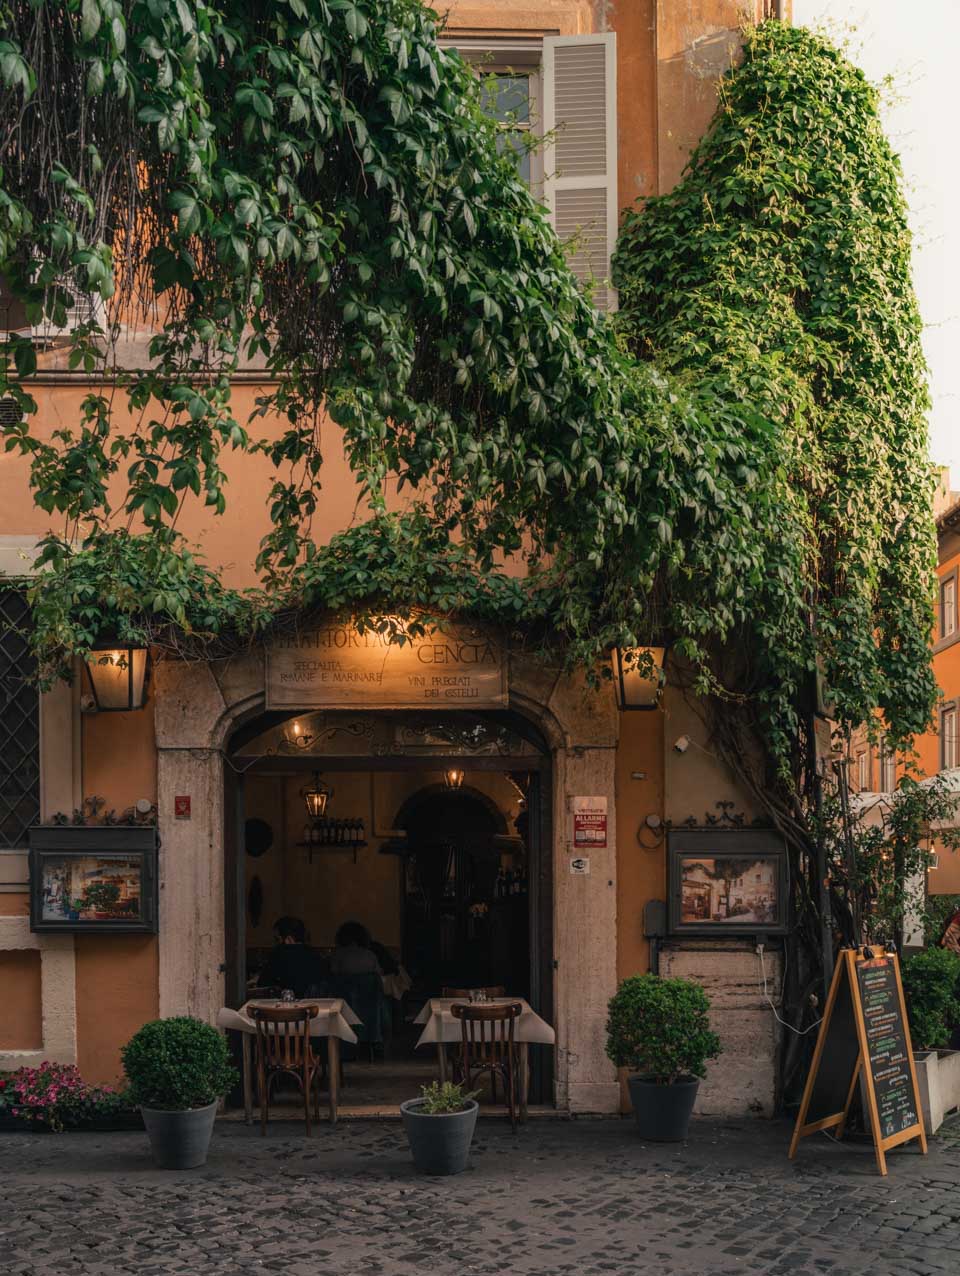 Local restaurant in Trastevere, Rome with green vines hanging above